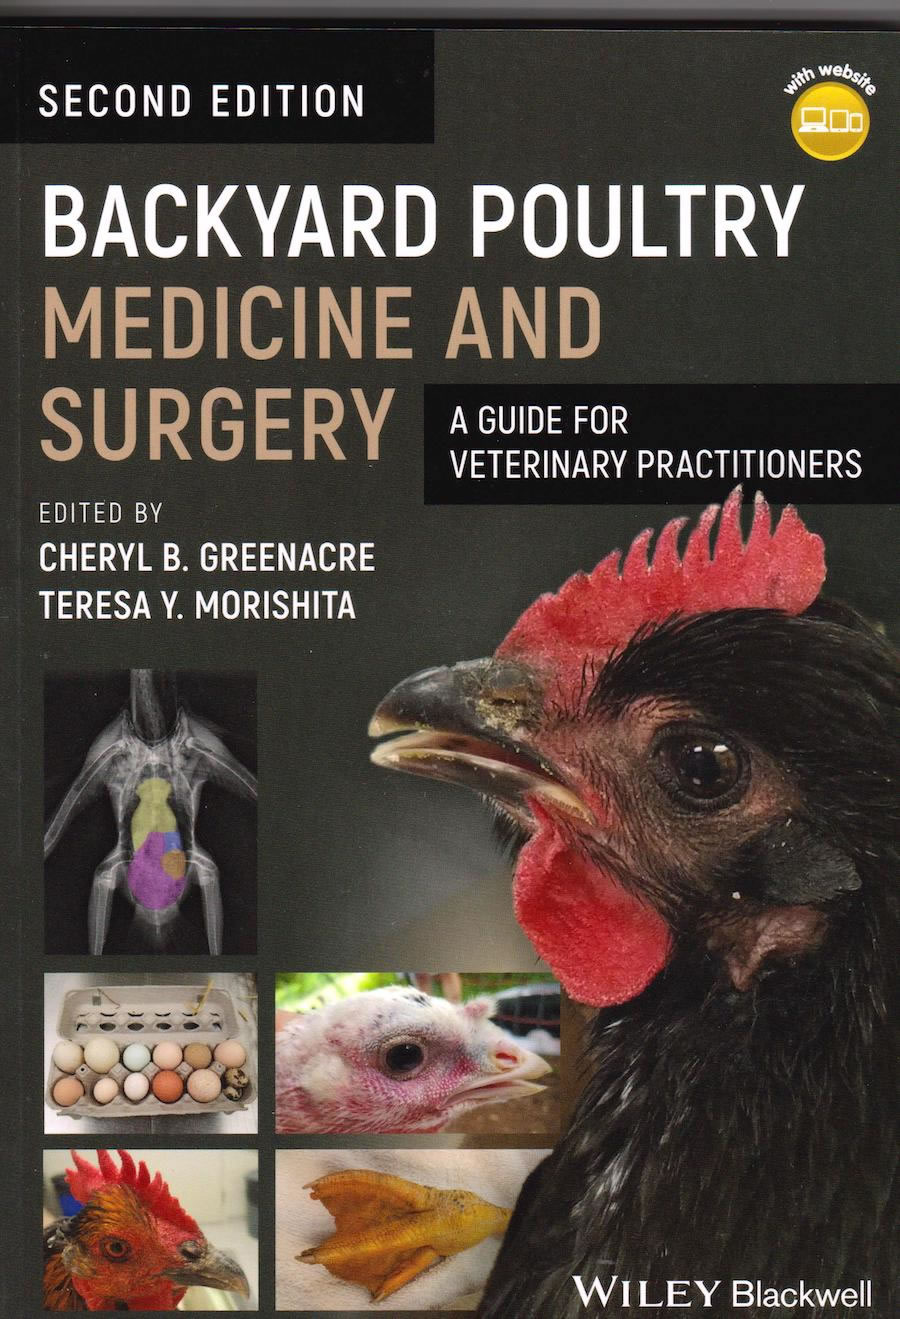 Backyard Poultry Medicine and Surgery - A guide for veterinary practitioners